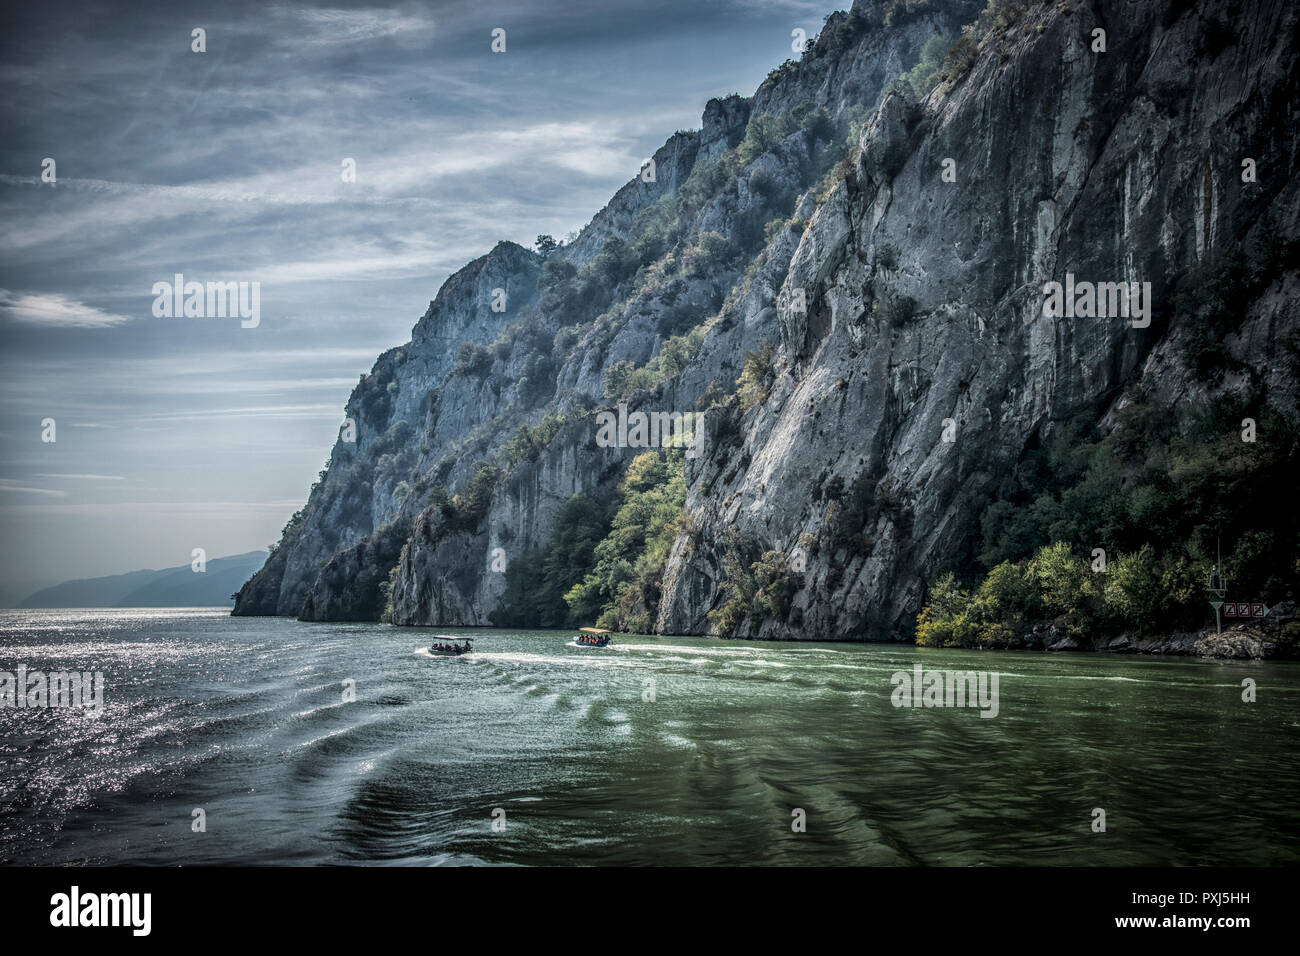 Blue Danube and nature in Djerdap gorge in Serbia Stock Photo